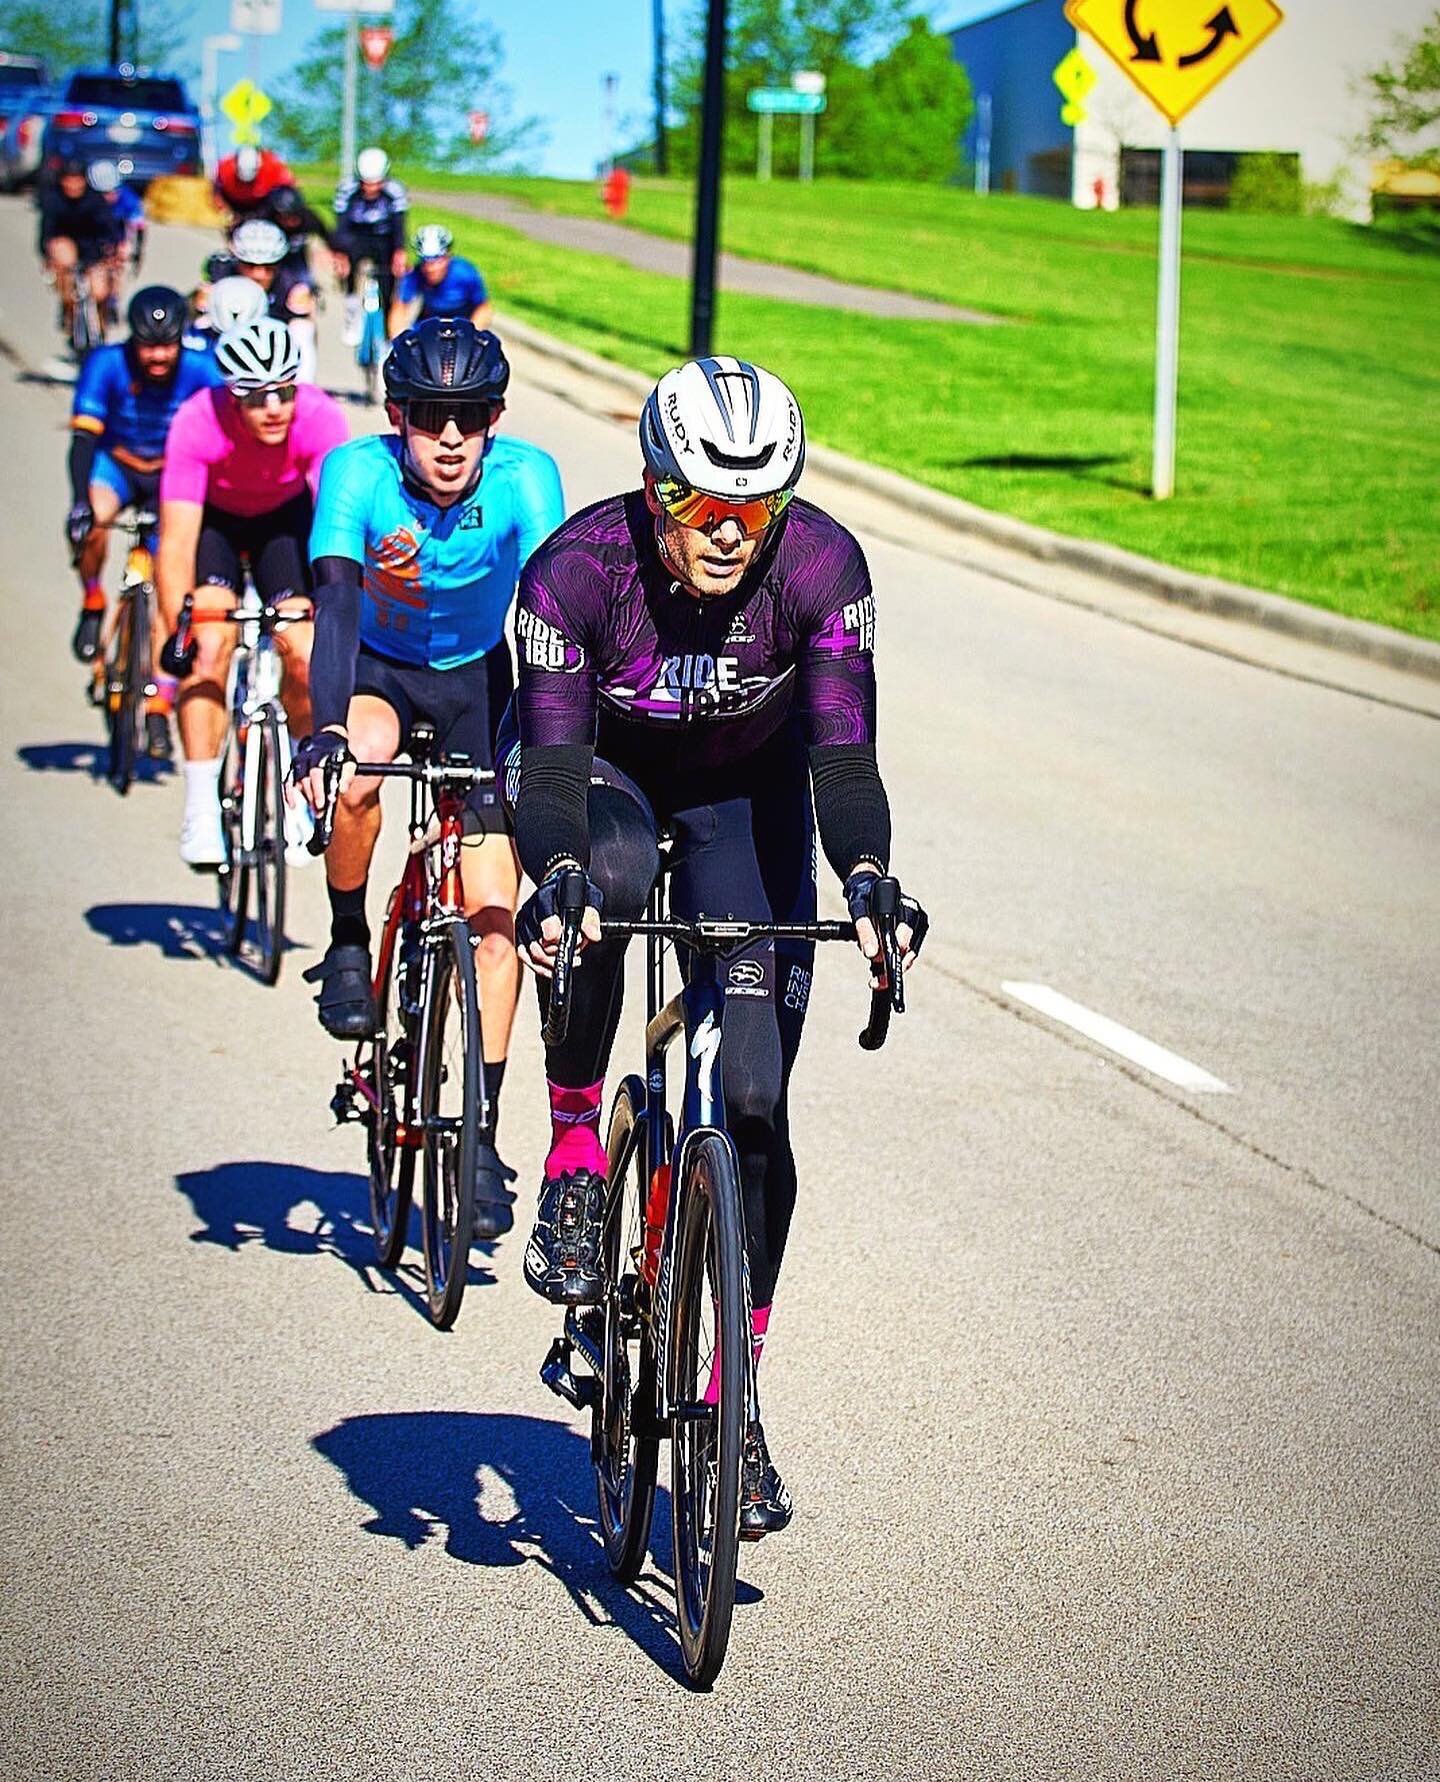 Blog Alert 🚨 

Read all about John&rsquo;s journey of racing with #ibd in his end of year recap. 

Link in bio to read more!

#ride4ibd #ibd #blog #cycling #cyclingblog #cyclinglife #ibdawareness #crohnsdisease #ibdwarrior #bikelife